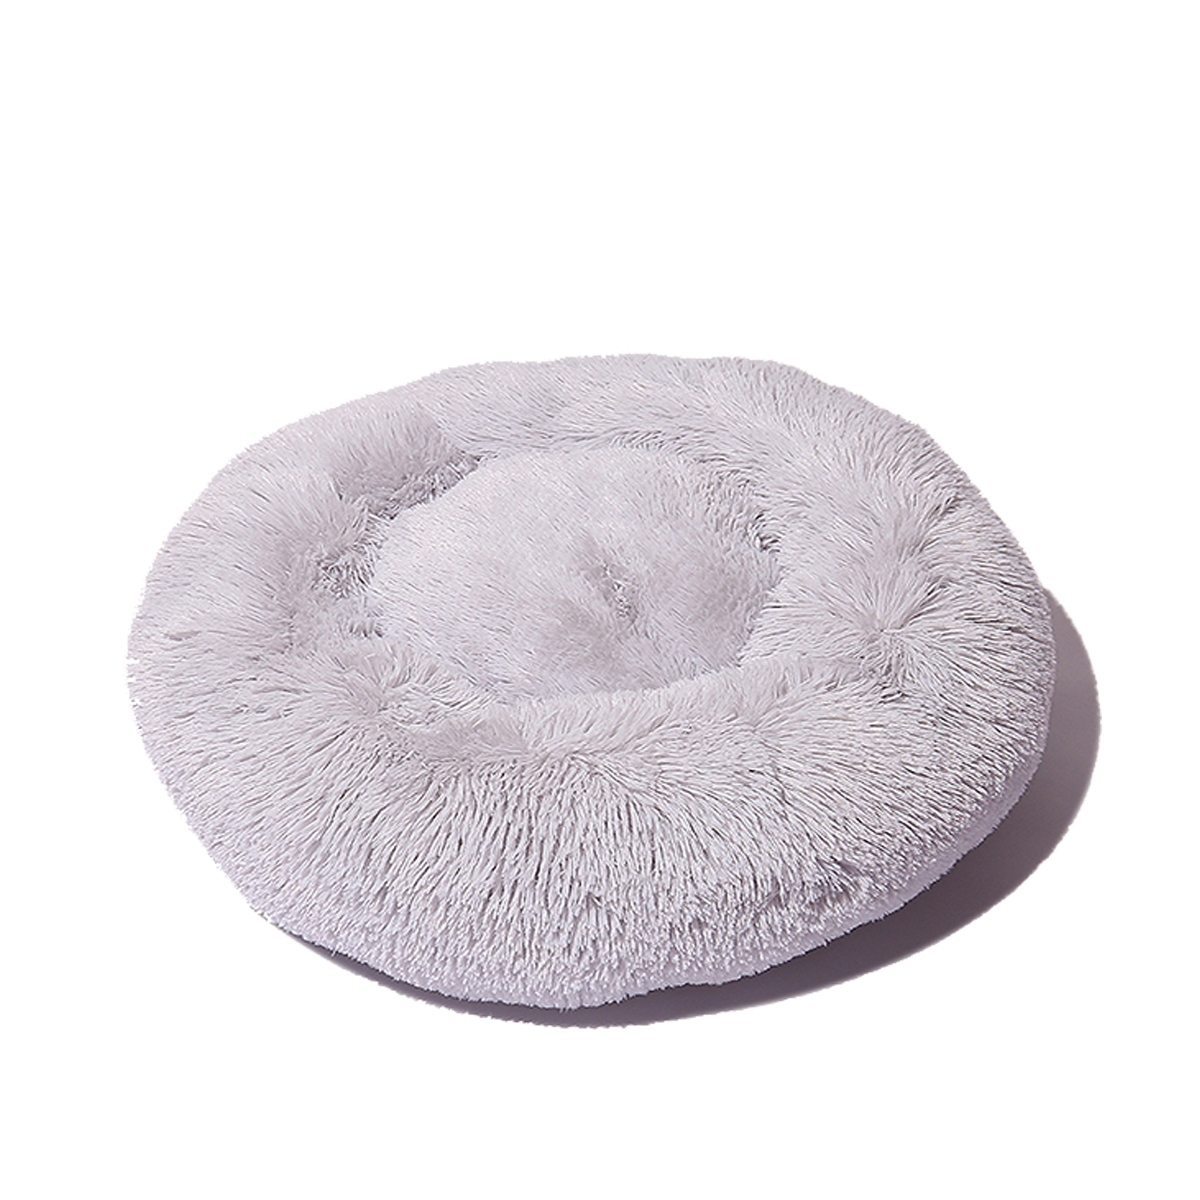 70cm-Plush-Fluffy-Soft-Pet-Bed-for-Cats--Dogs-Calming-Bed-Pad-Soft-Mat-Home-1808936-6